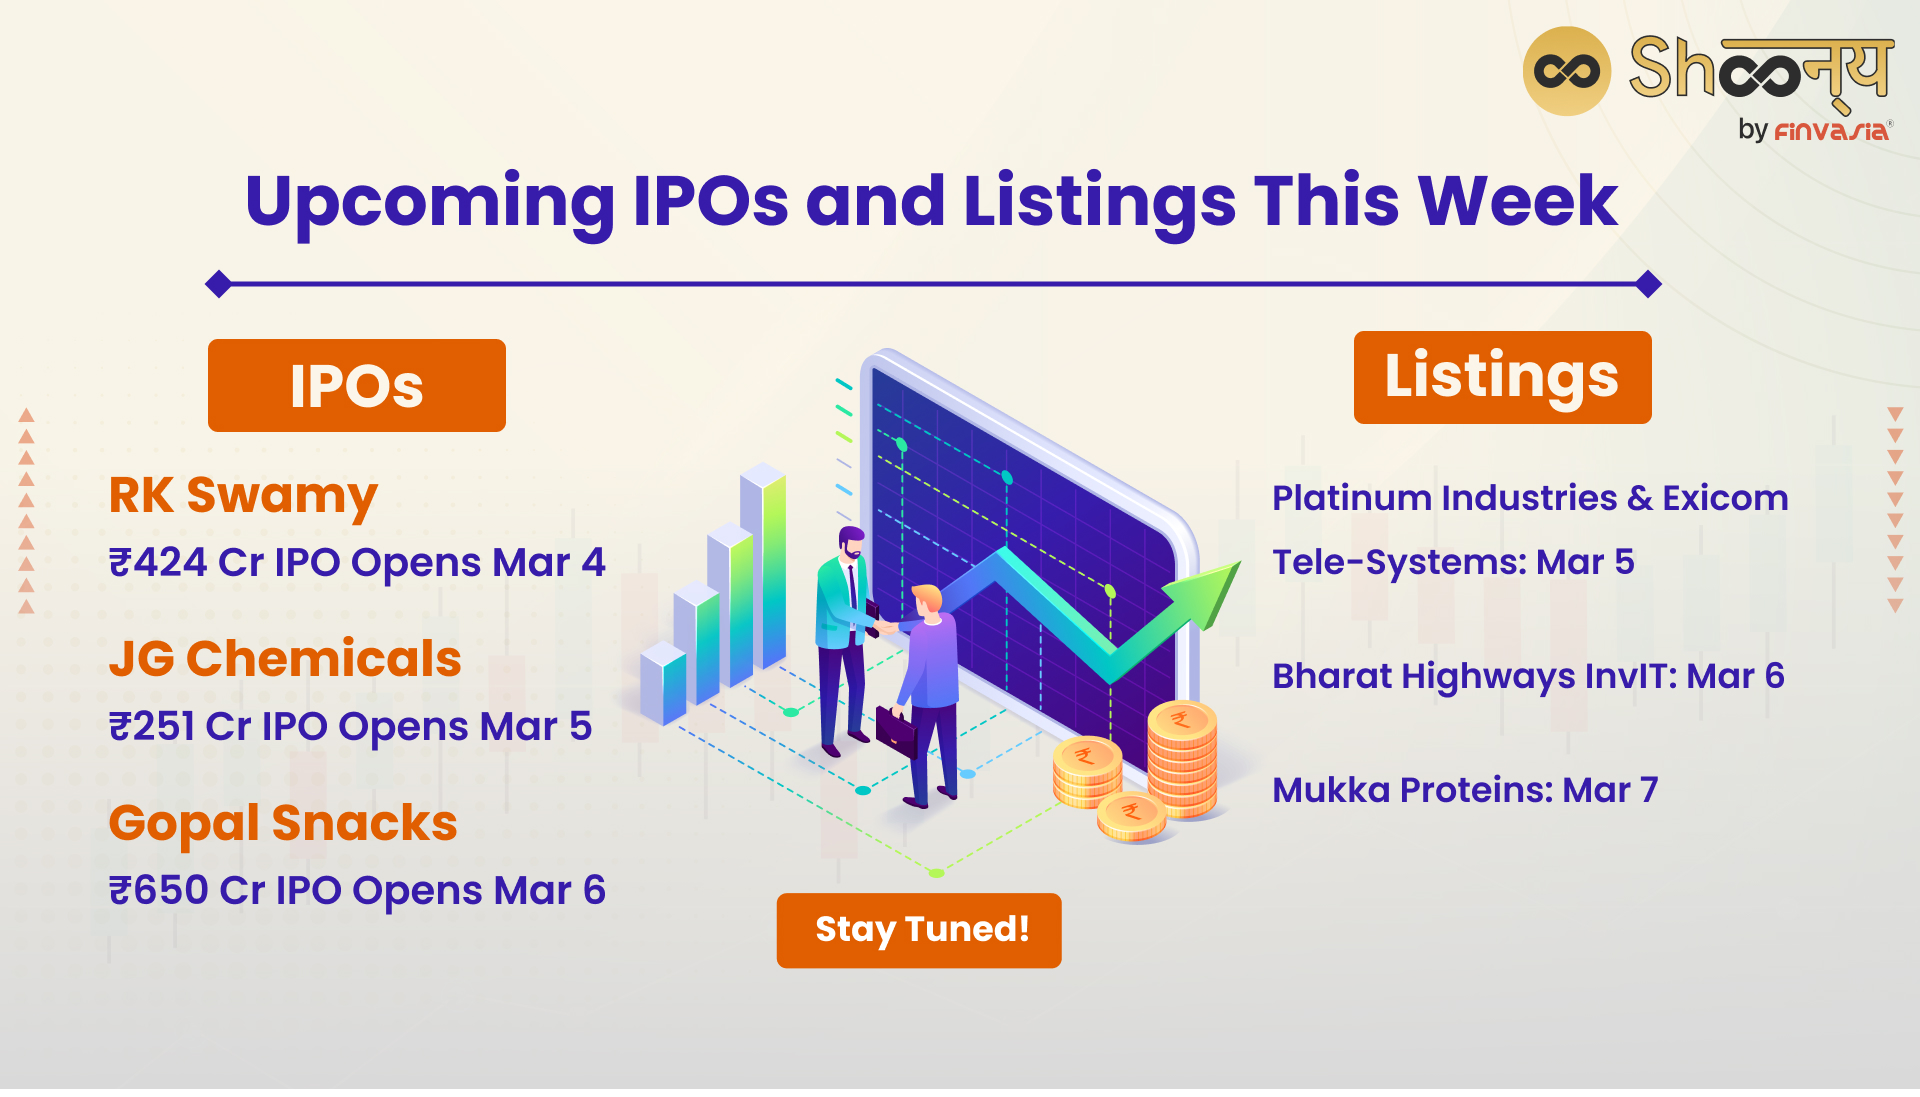 Upcoming IPOs and Listings This Week